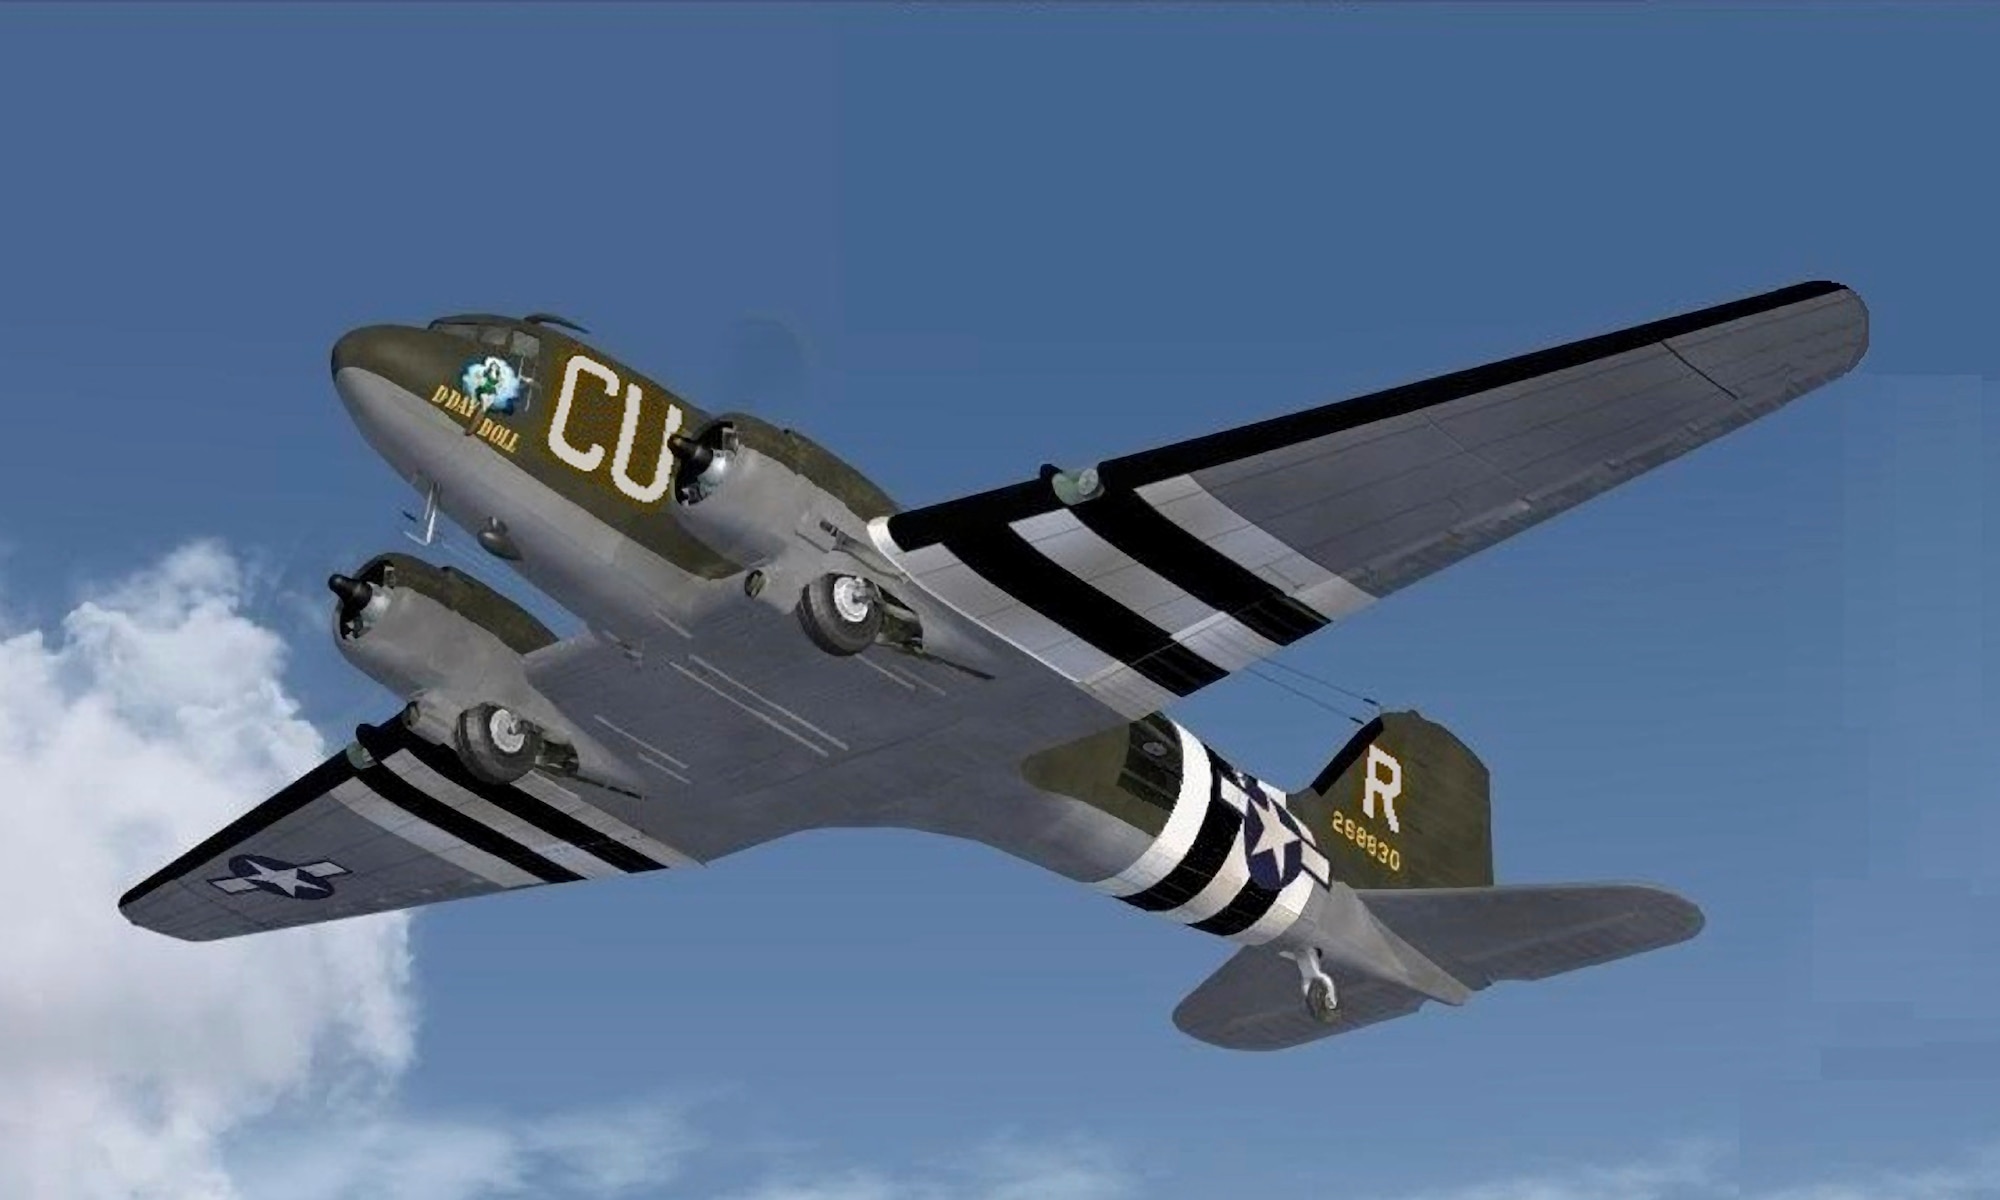 Paratroopers are scheduled to jump out of a C-53D Skytrooper named D-Day Doll as it flies over the skies of the National Museum of the U.S. Air Force on May 13 at approximately 10 a.m. as part of the events commemorating the 75th Anniversary of D-Day. D-Day Doll participated in the Normandy invasion in 1944 by dropping paratroopers, towing gliders, flying supplies and evacuating the wounded.(contributed photo)